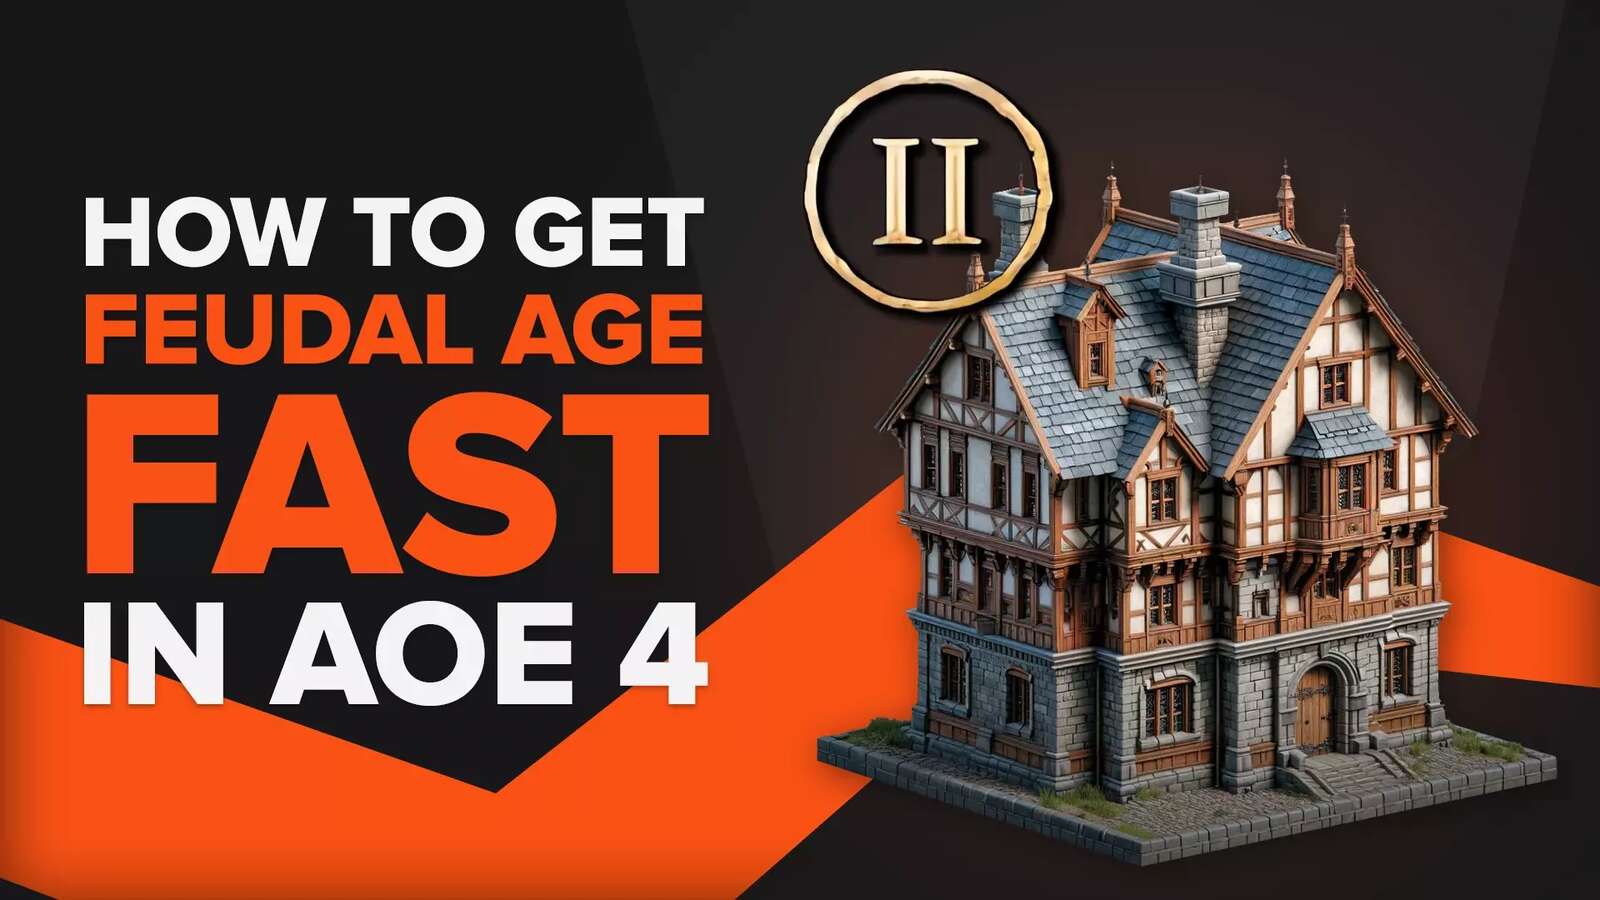 This Is The Fastest Way To Reach Feudal Age In AoE 4